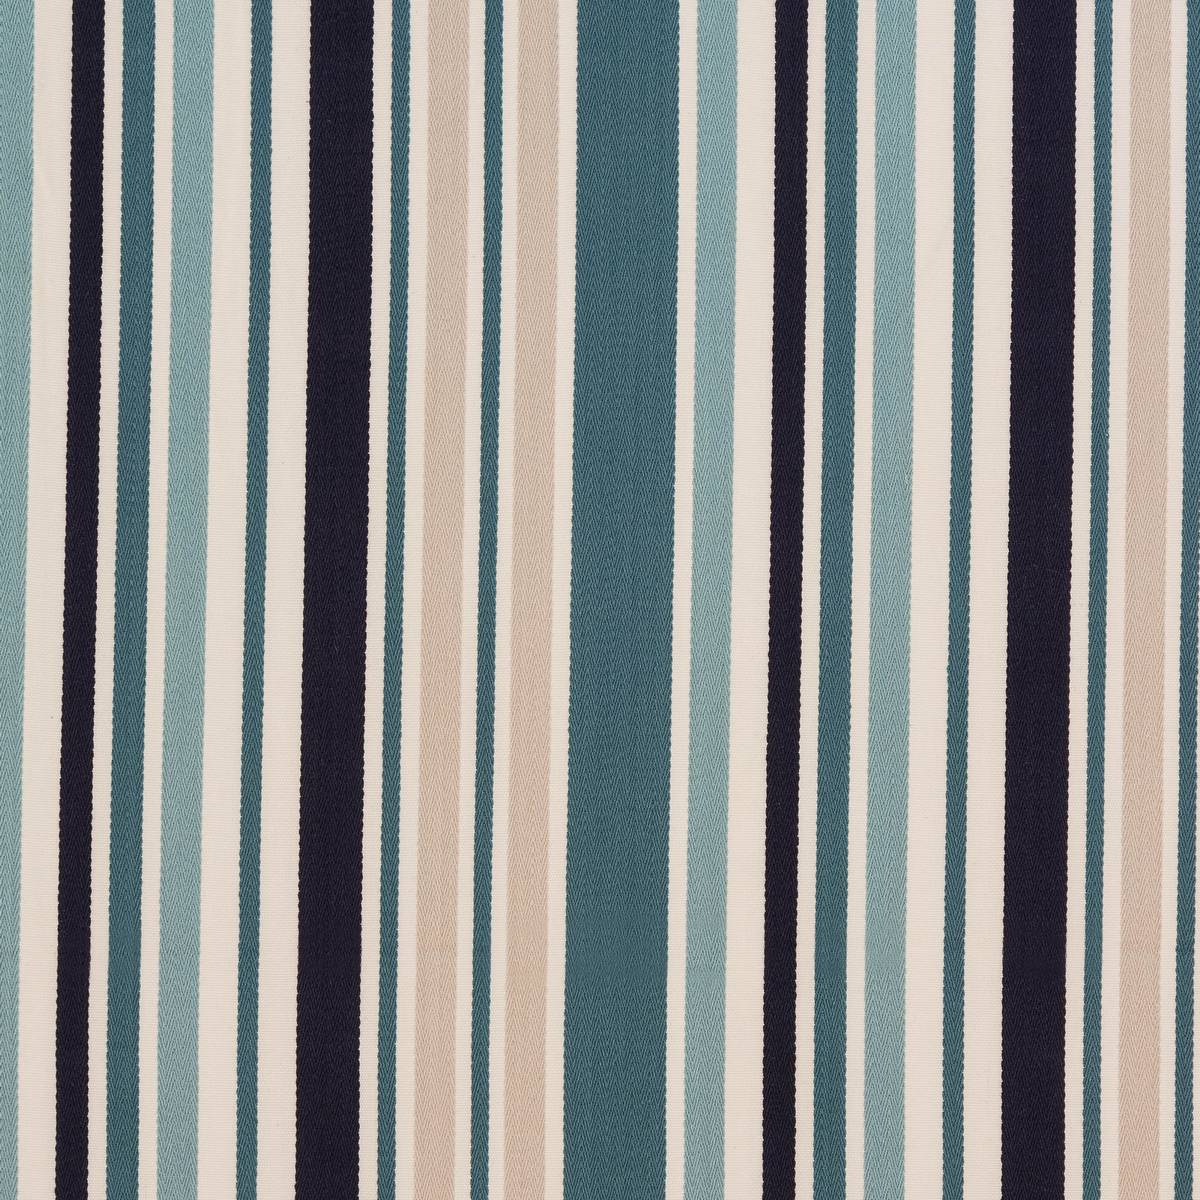 Roseland Teal Fabric by Porter & Stone